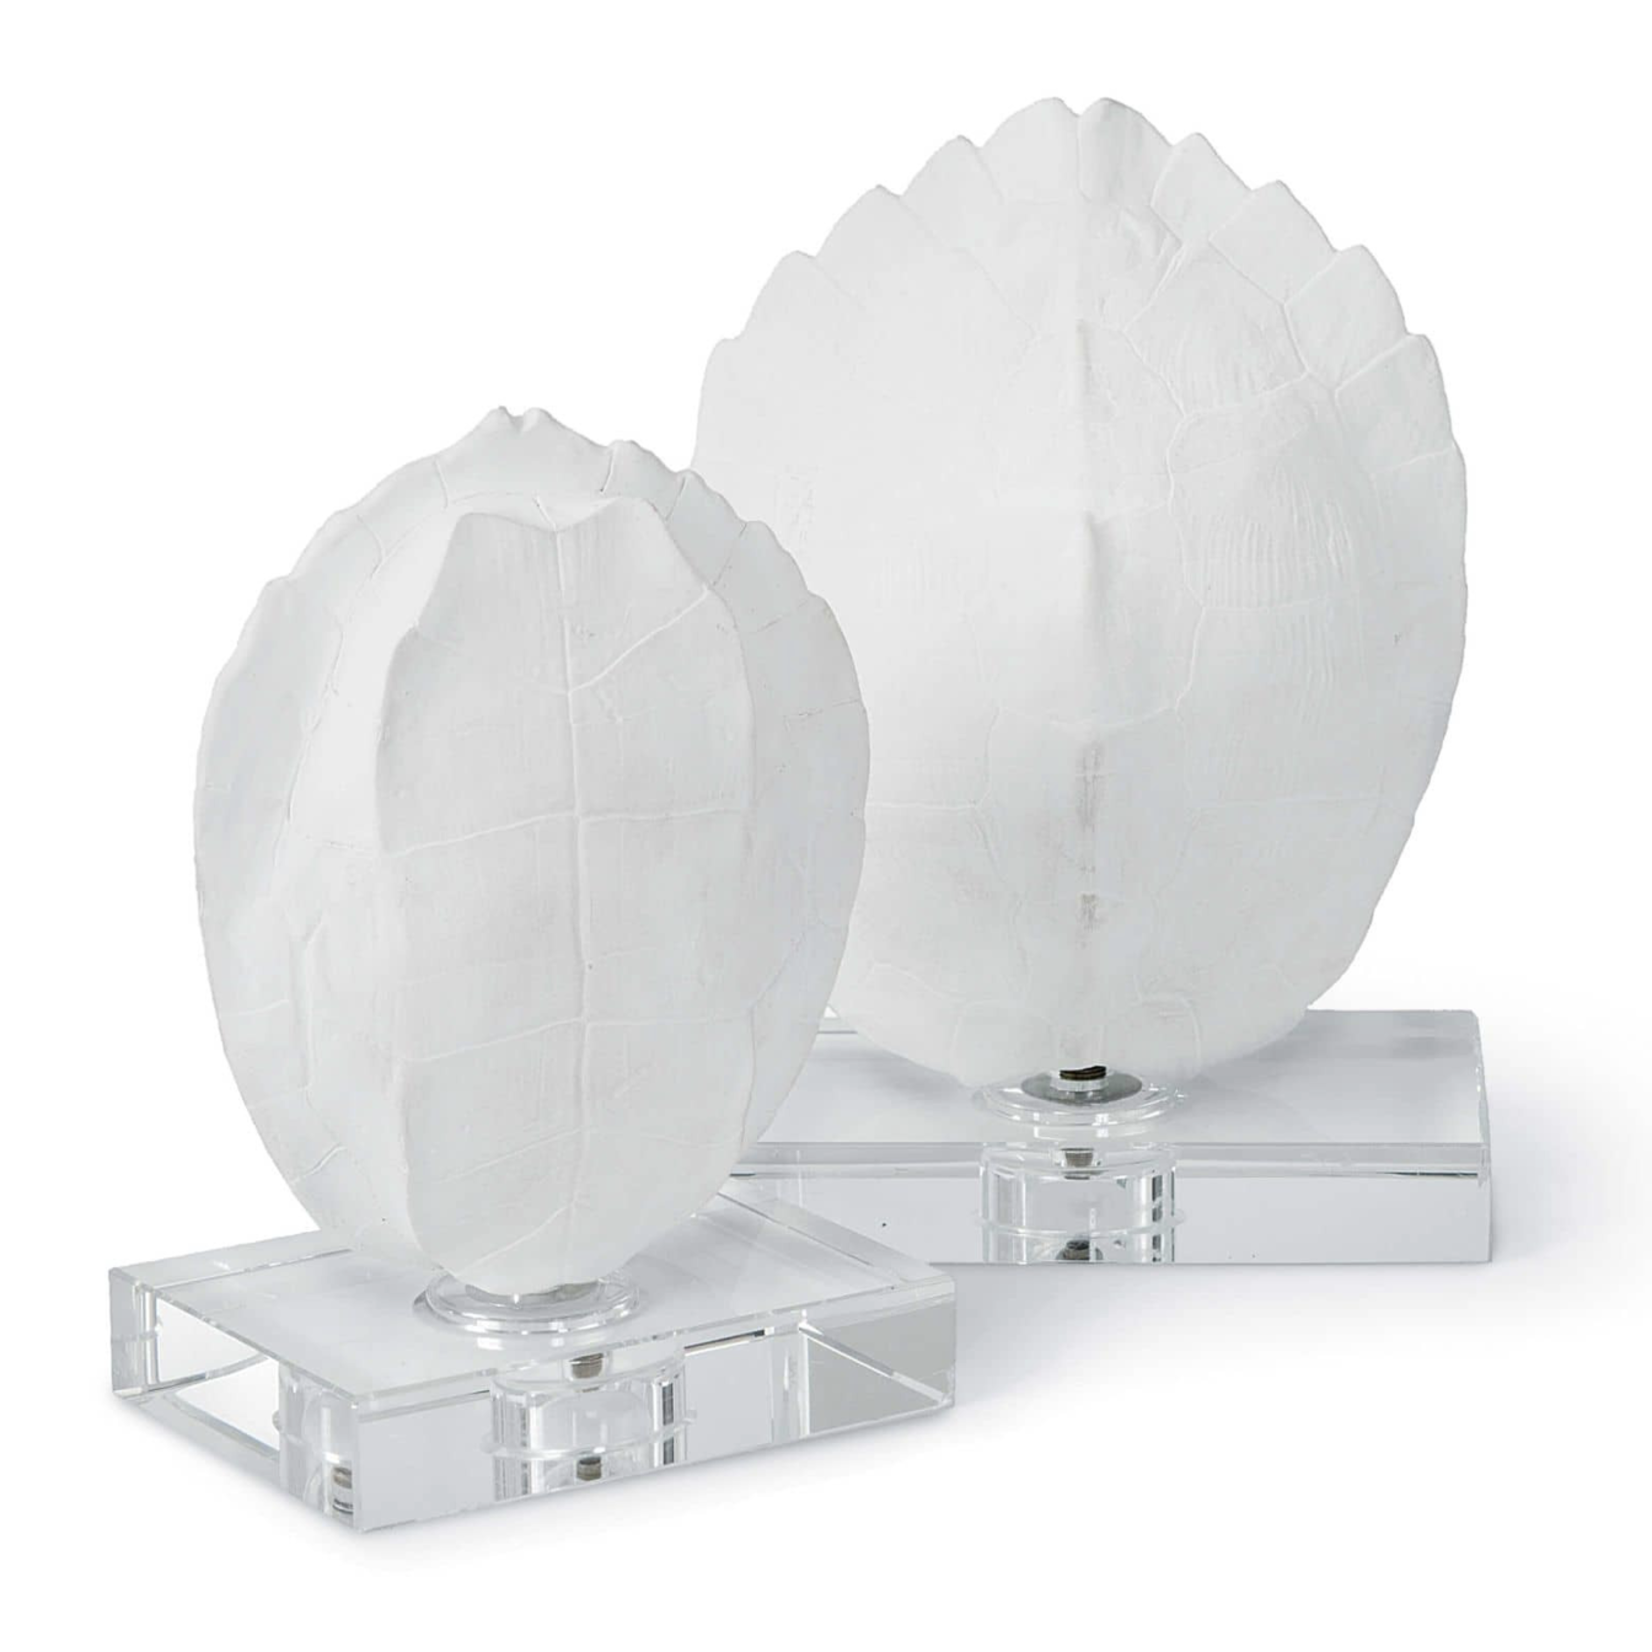 Outside The Box 9"  Set of 2 Turtle Shells On Crystal